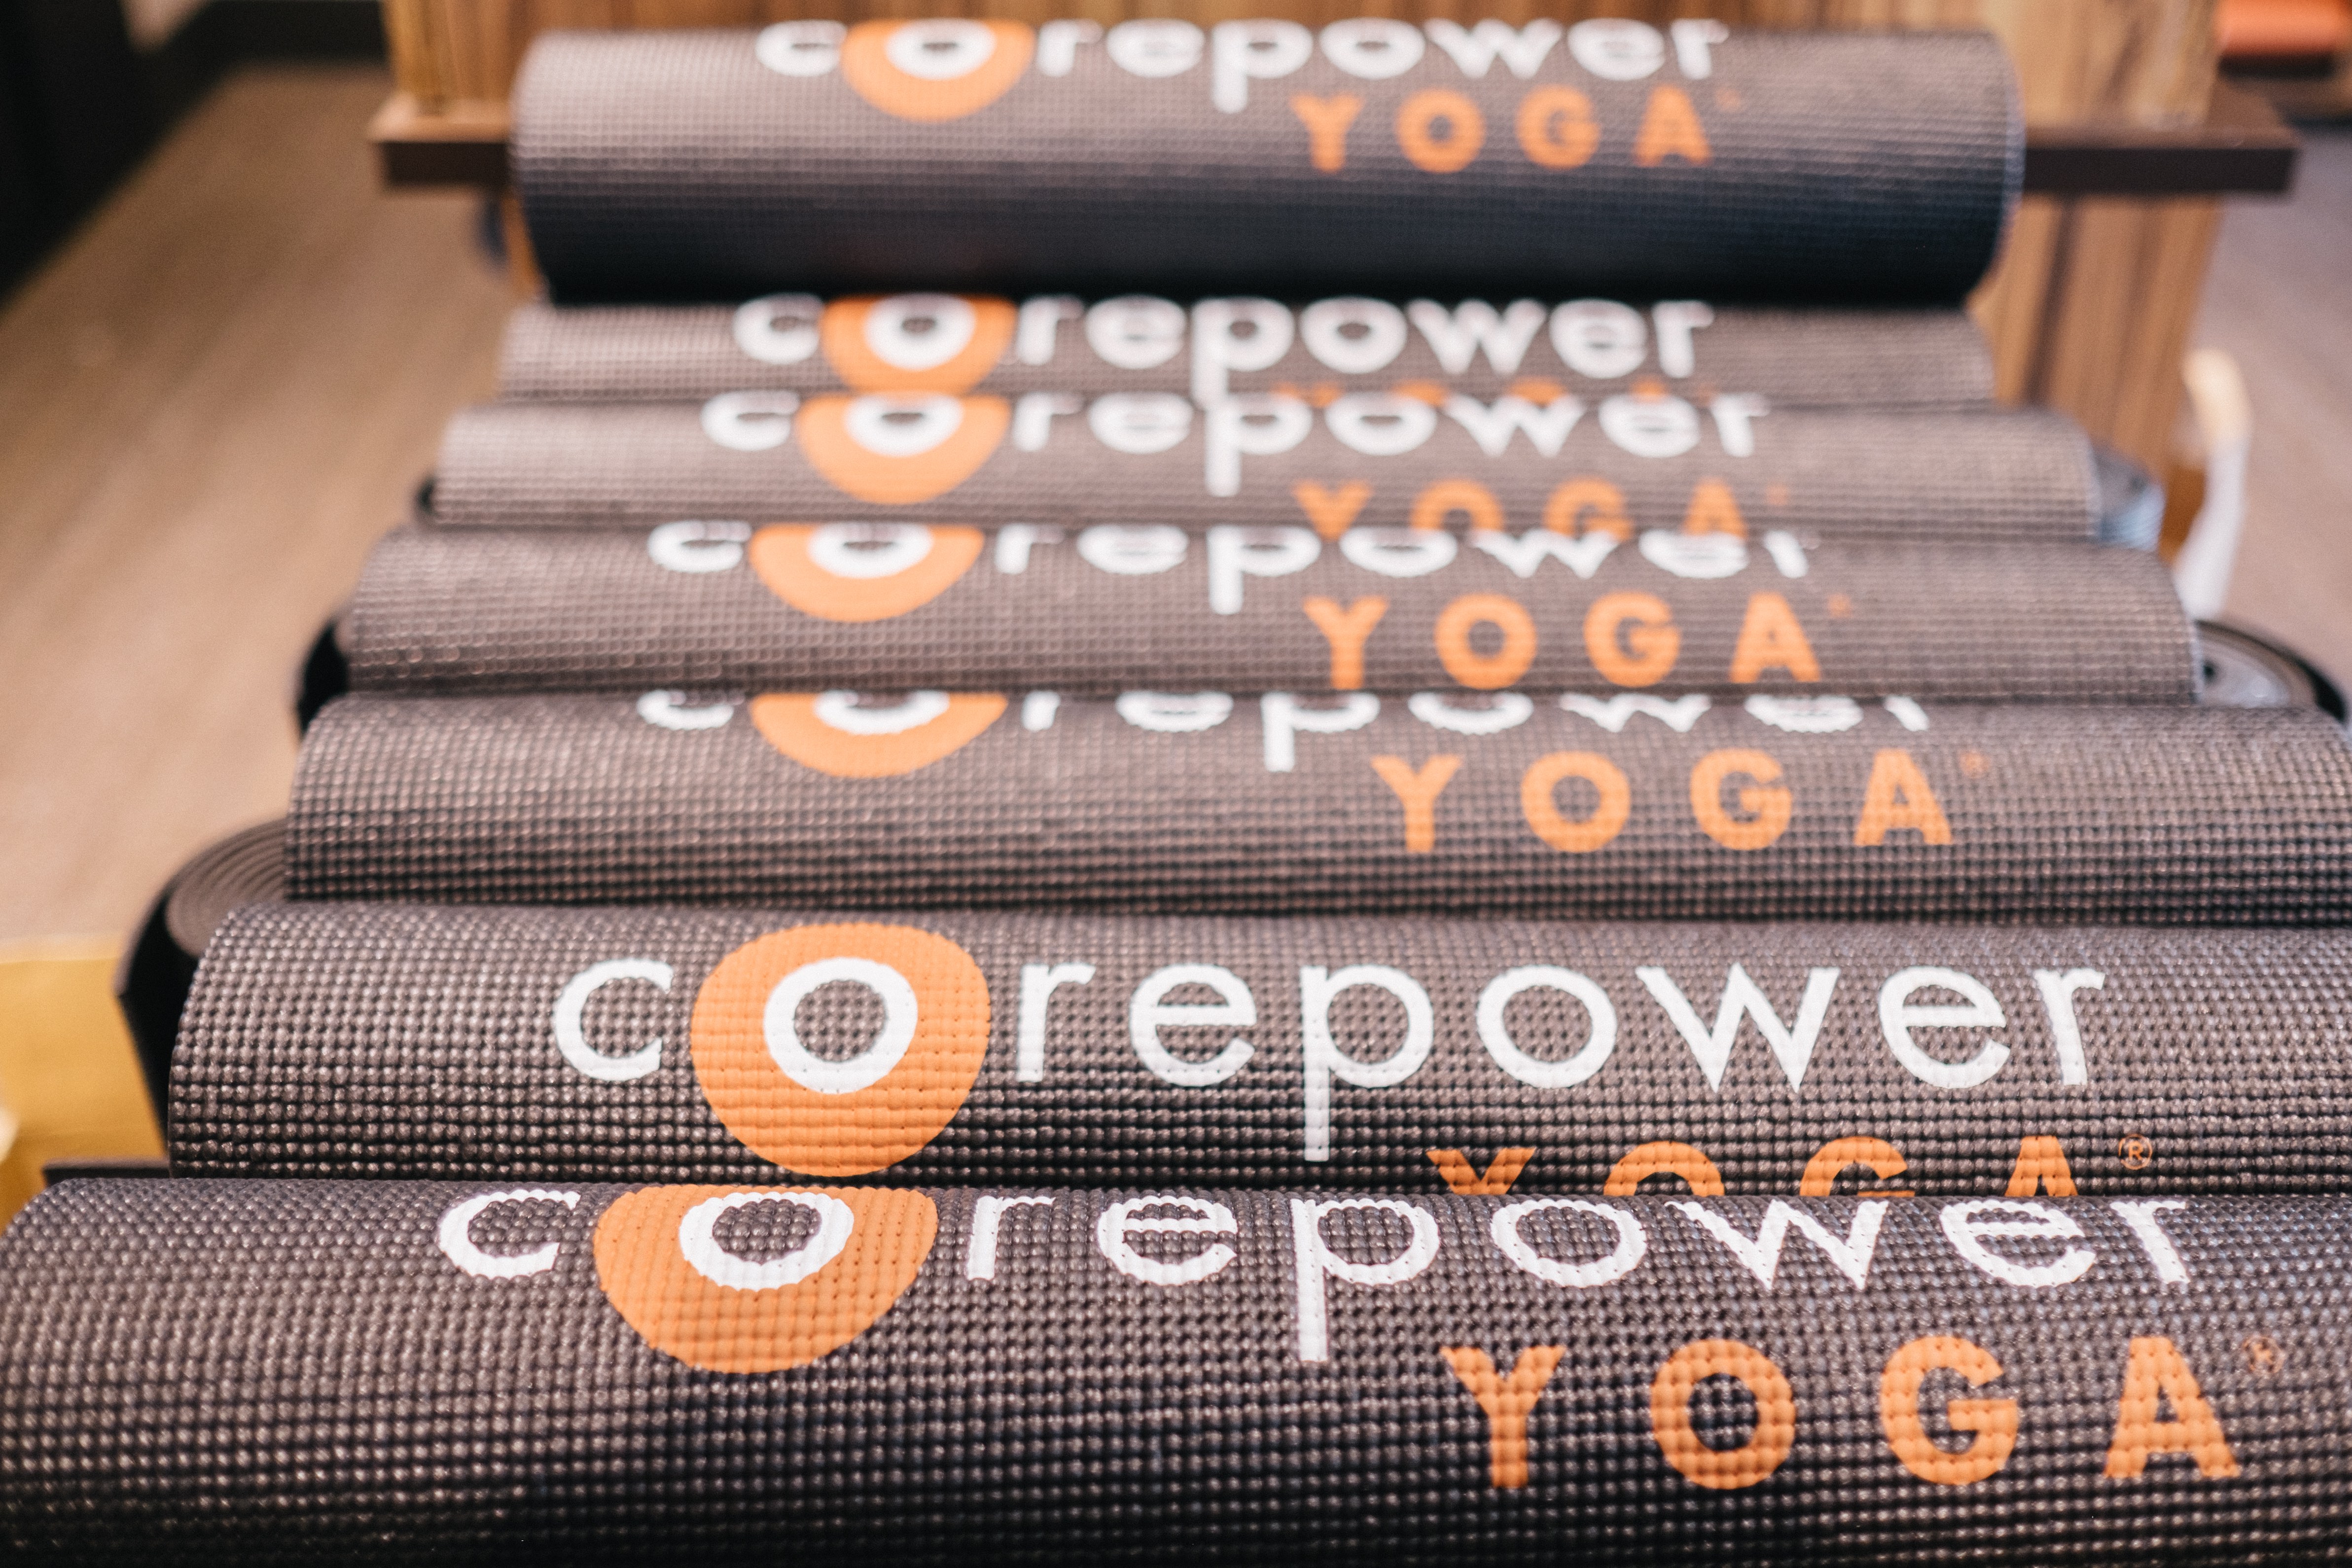 CorePower Yoga will open its third studio in the Raleigh area later this fall in North Raleigh's Stonehenge Market.